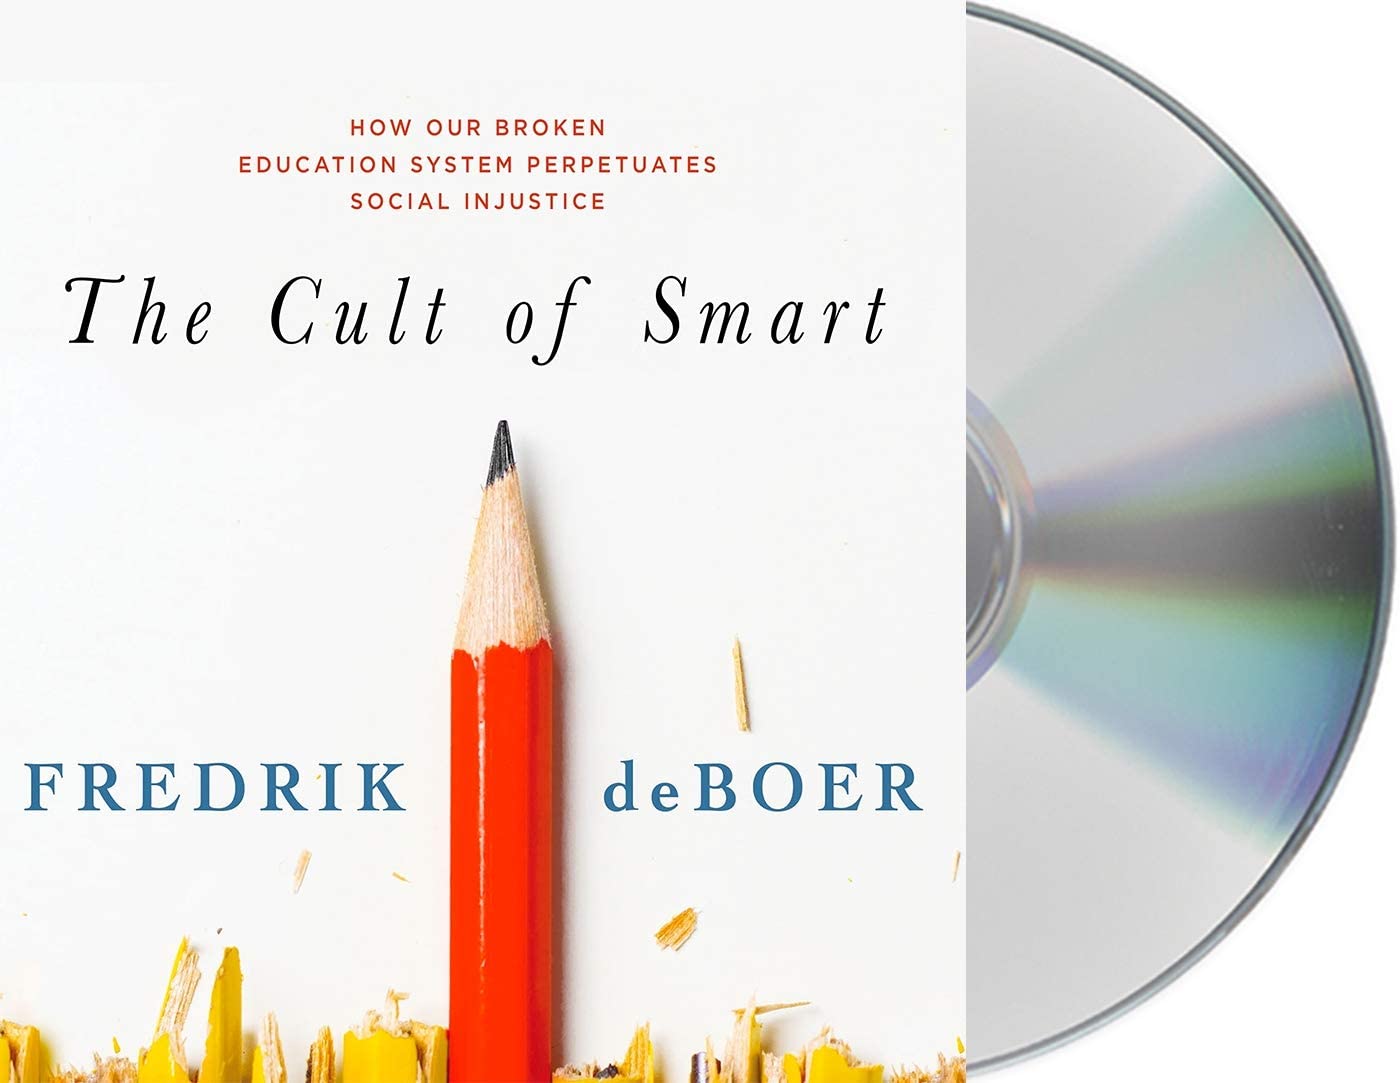 The Cult of Smart: How Our Broken Education System Perpetuates Social Injustice